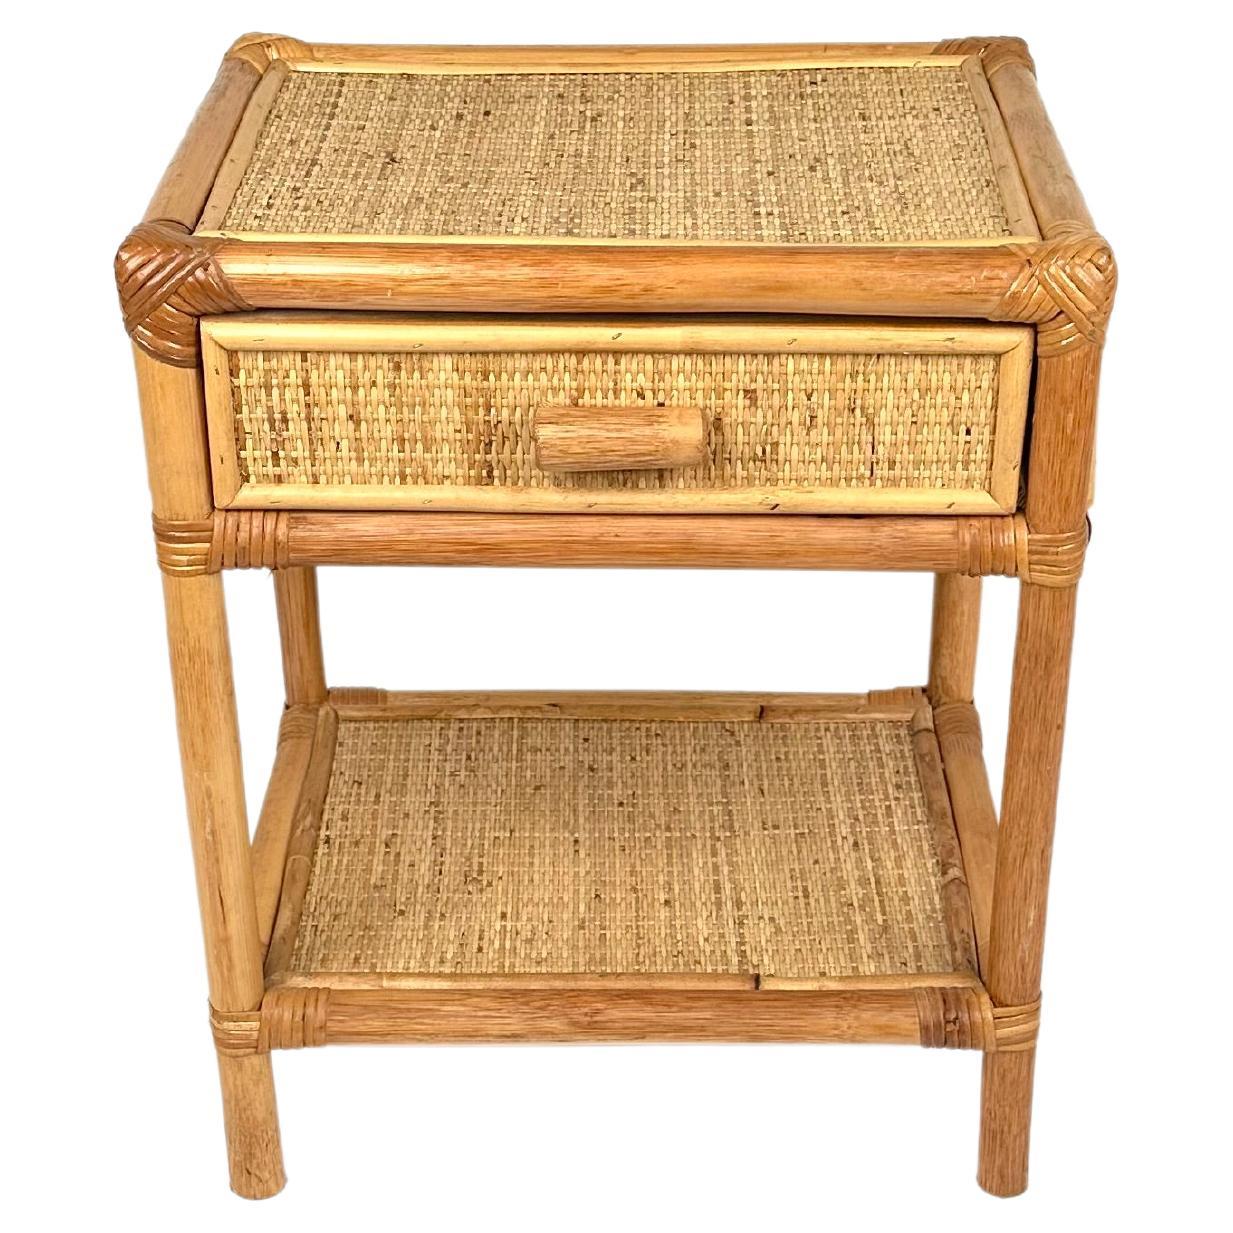 Midcentury Bedside Table Nightstand in Bamboo & Rattan, Italy, 1970s For Sale 5